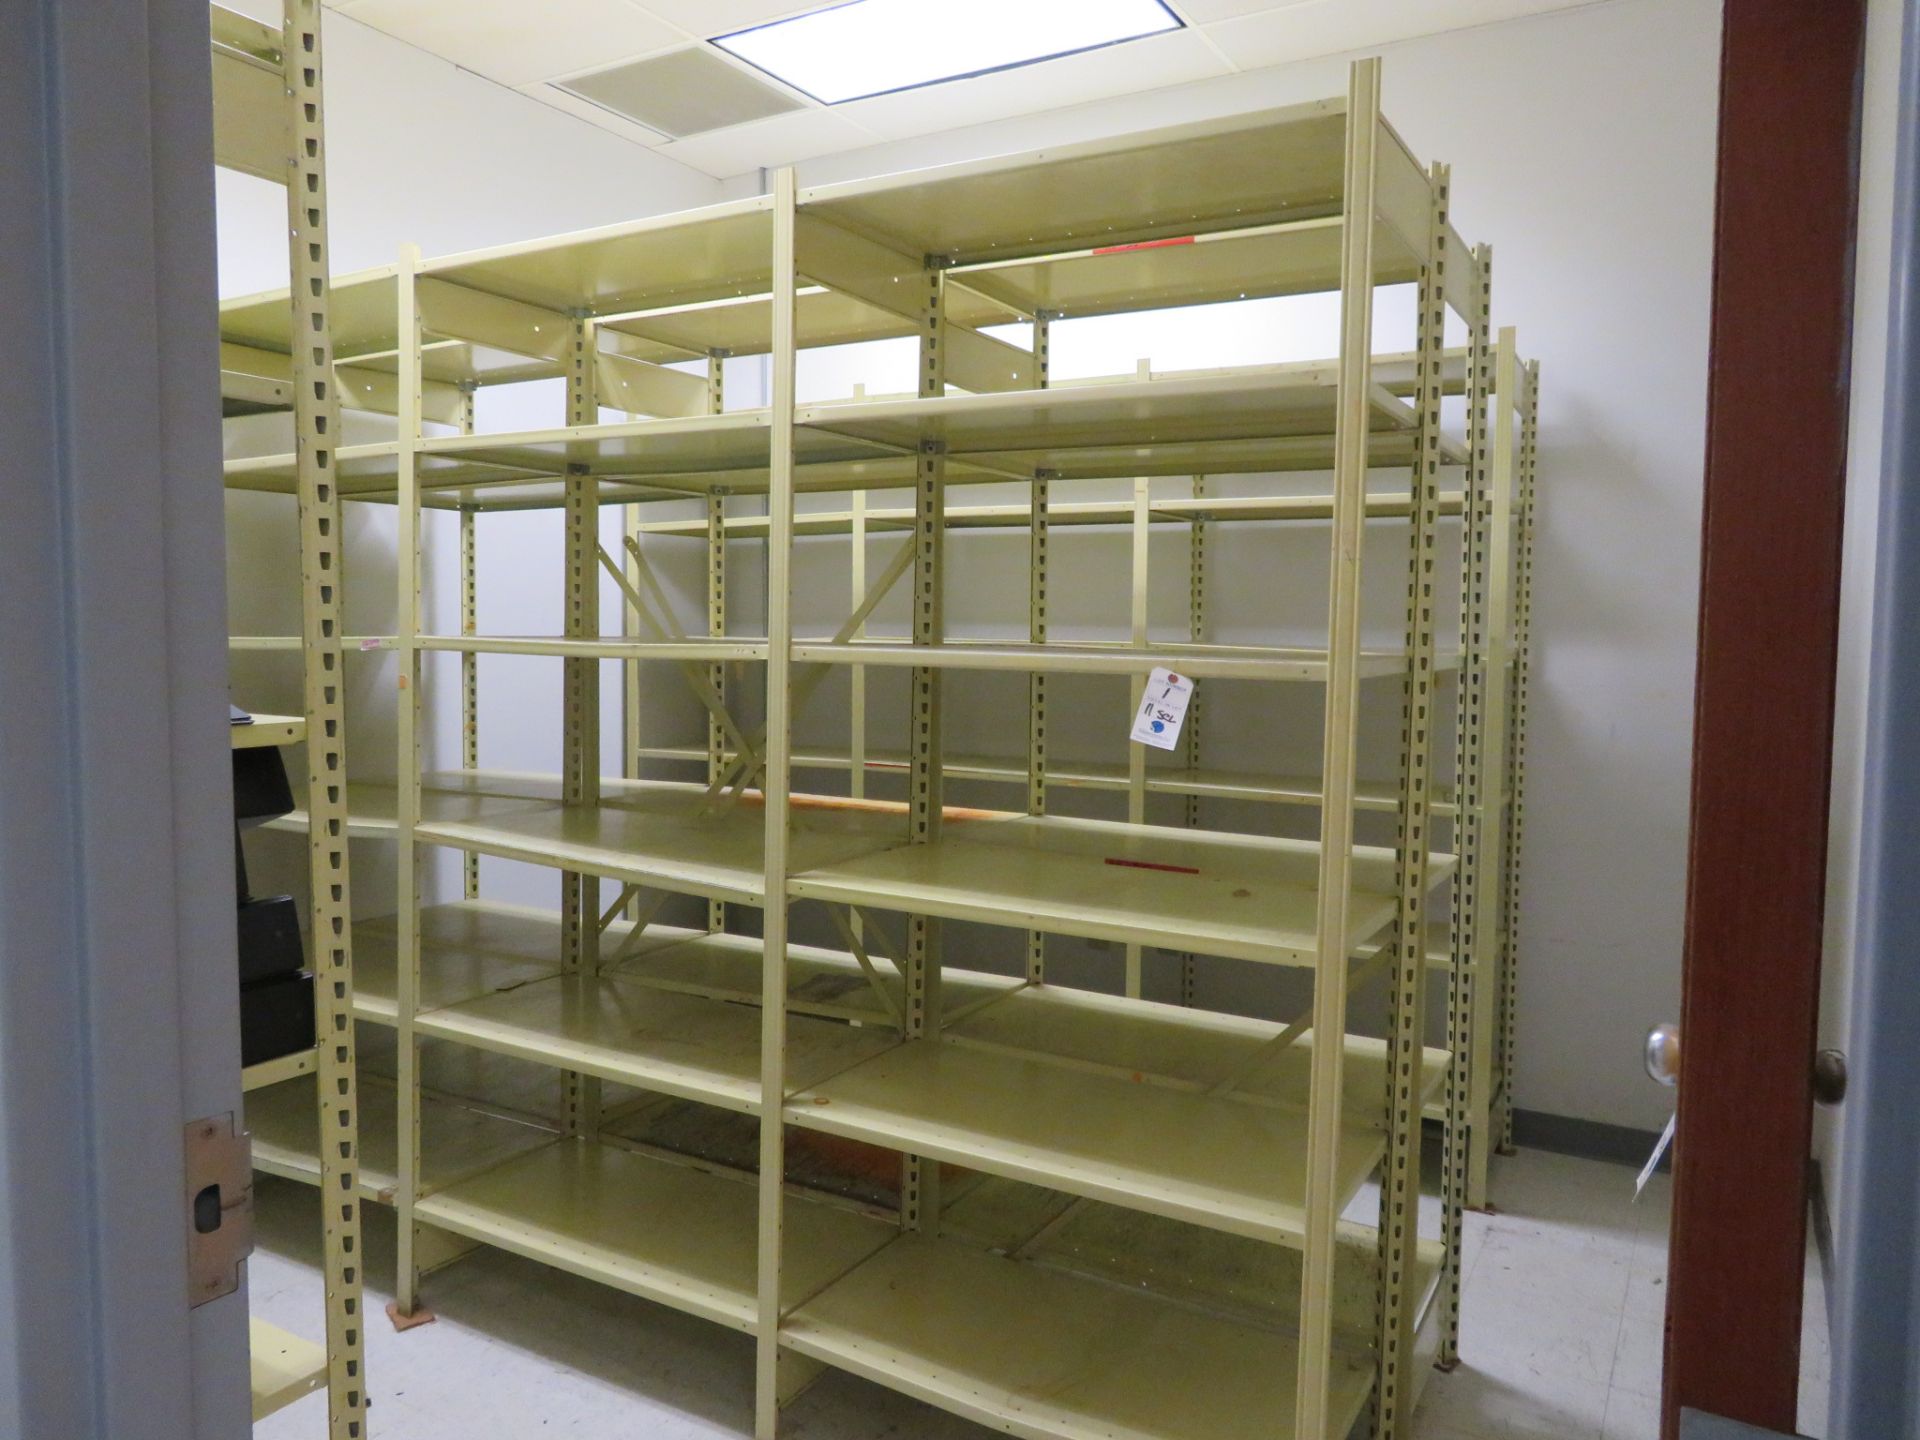 (11) Sections of Metal Equipto Shelving w/ 6 Shelves (In Room) Width: 3' Height: 7' Depth: 19"